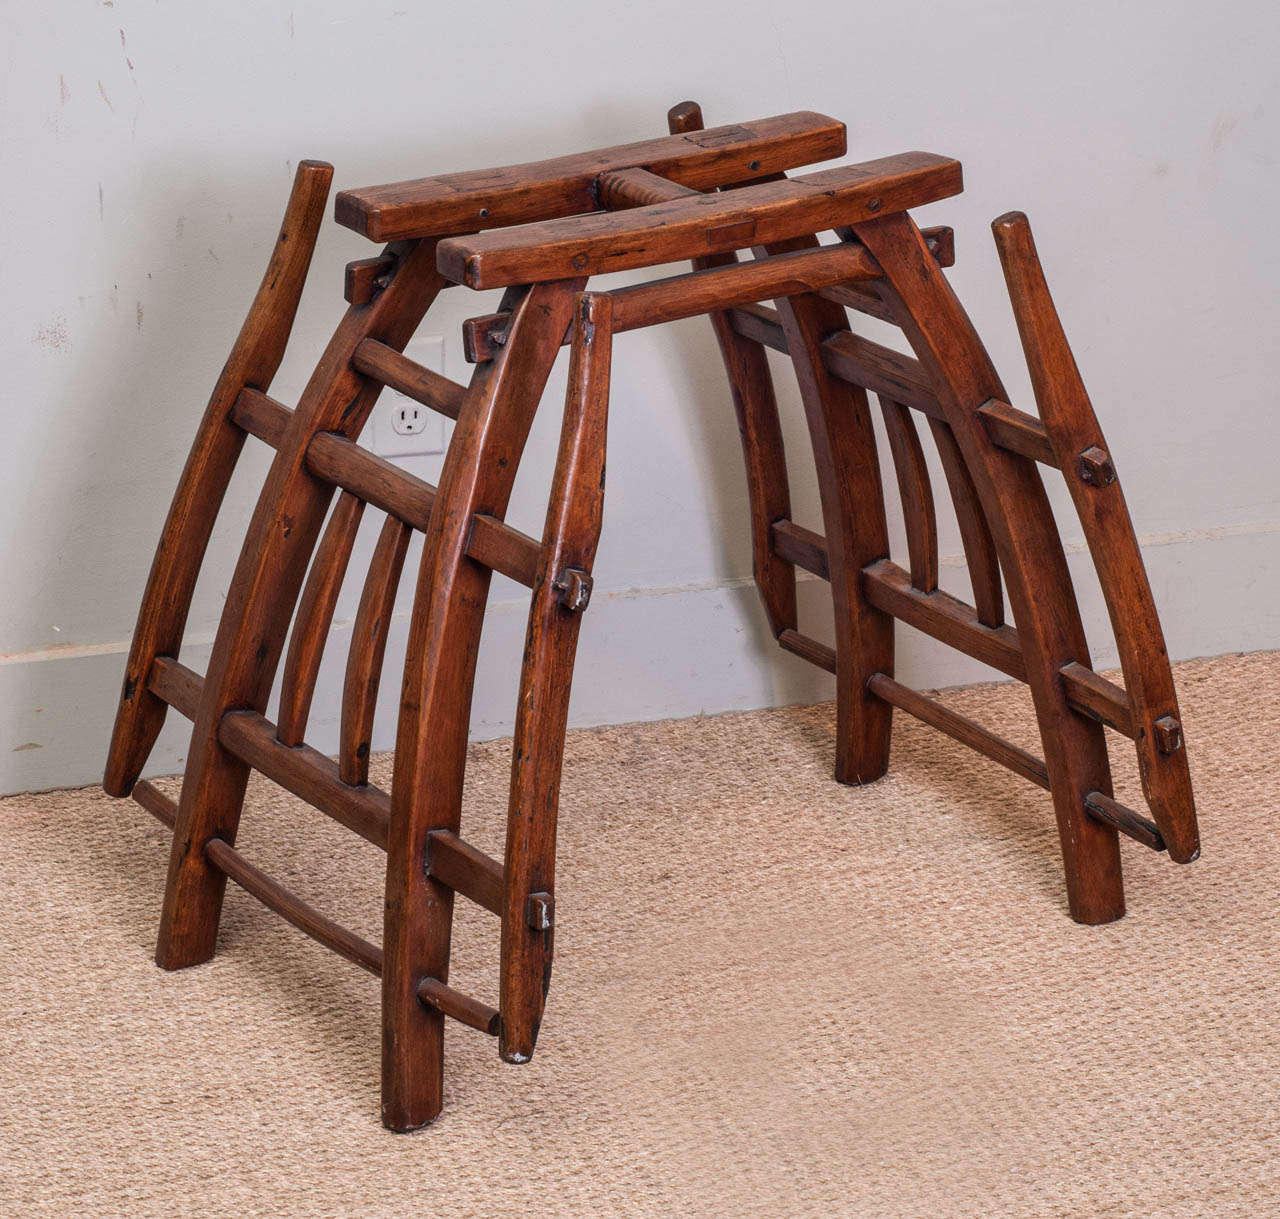 Expertly hand crafted with mortice and tenon construction in elmwood. This harness becomes a contemporary sculpture or unique table base.